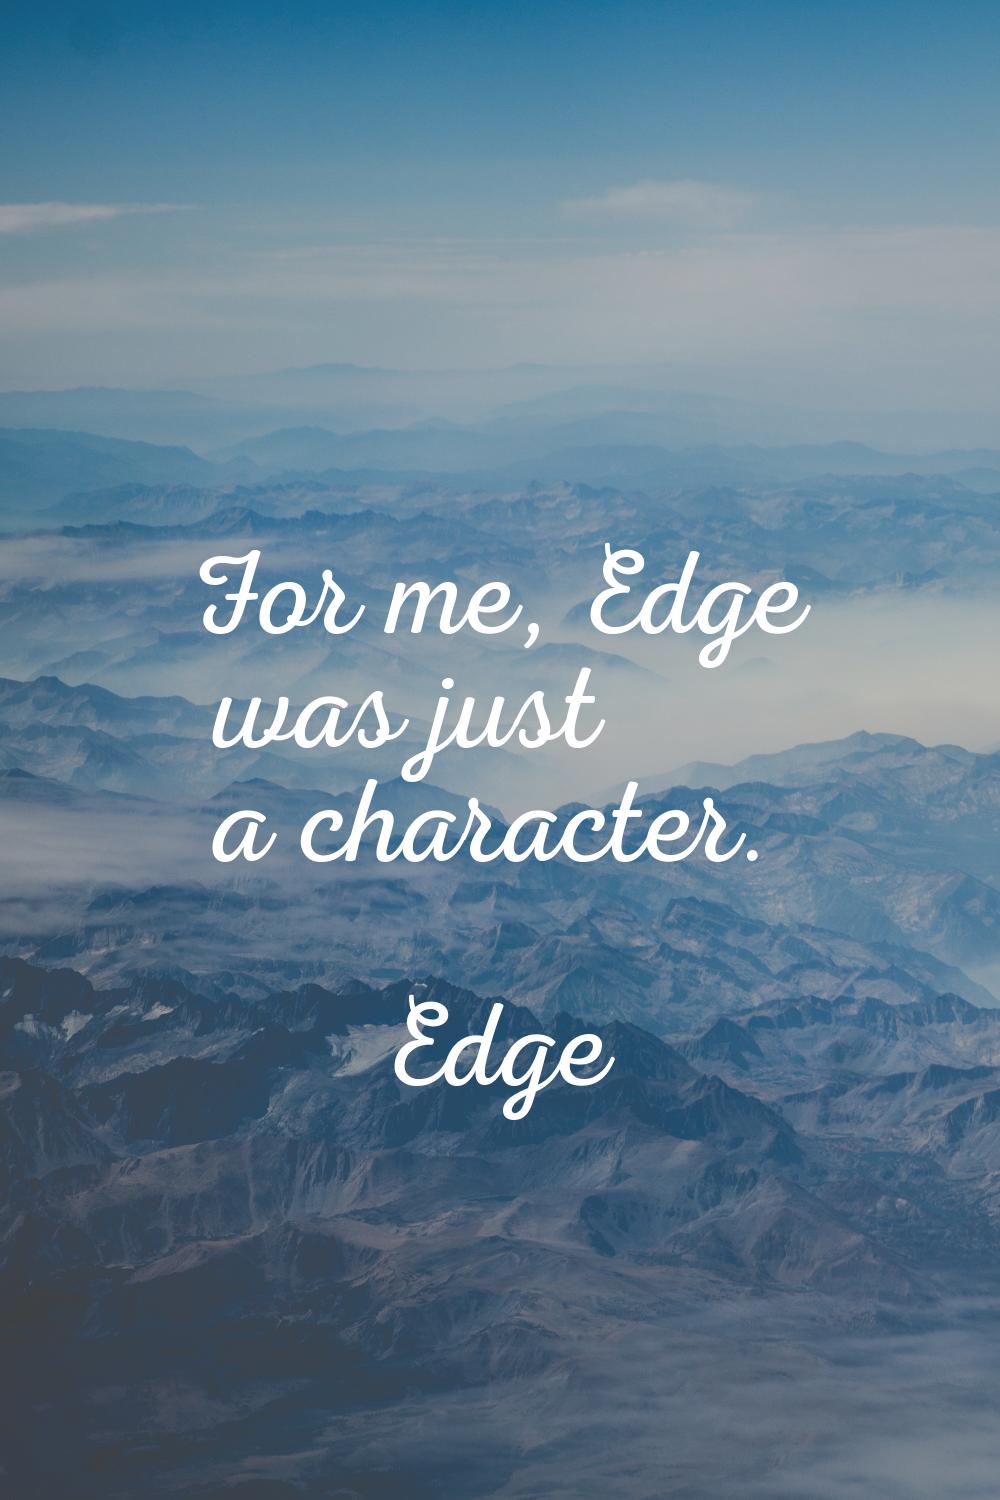 For me, Edge was just a character.